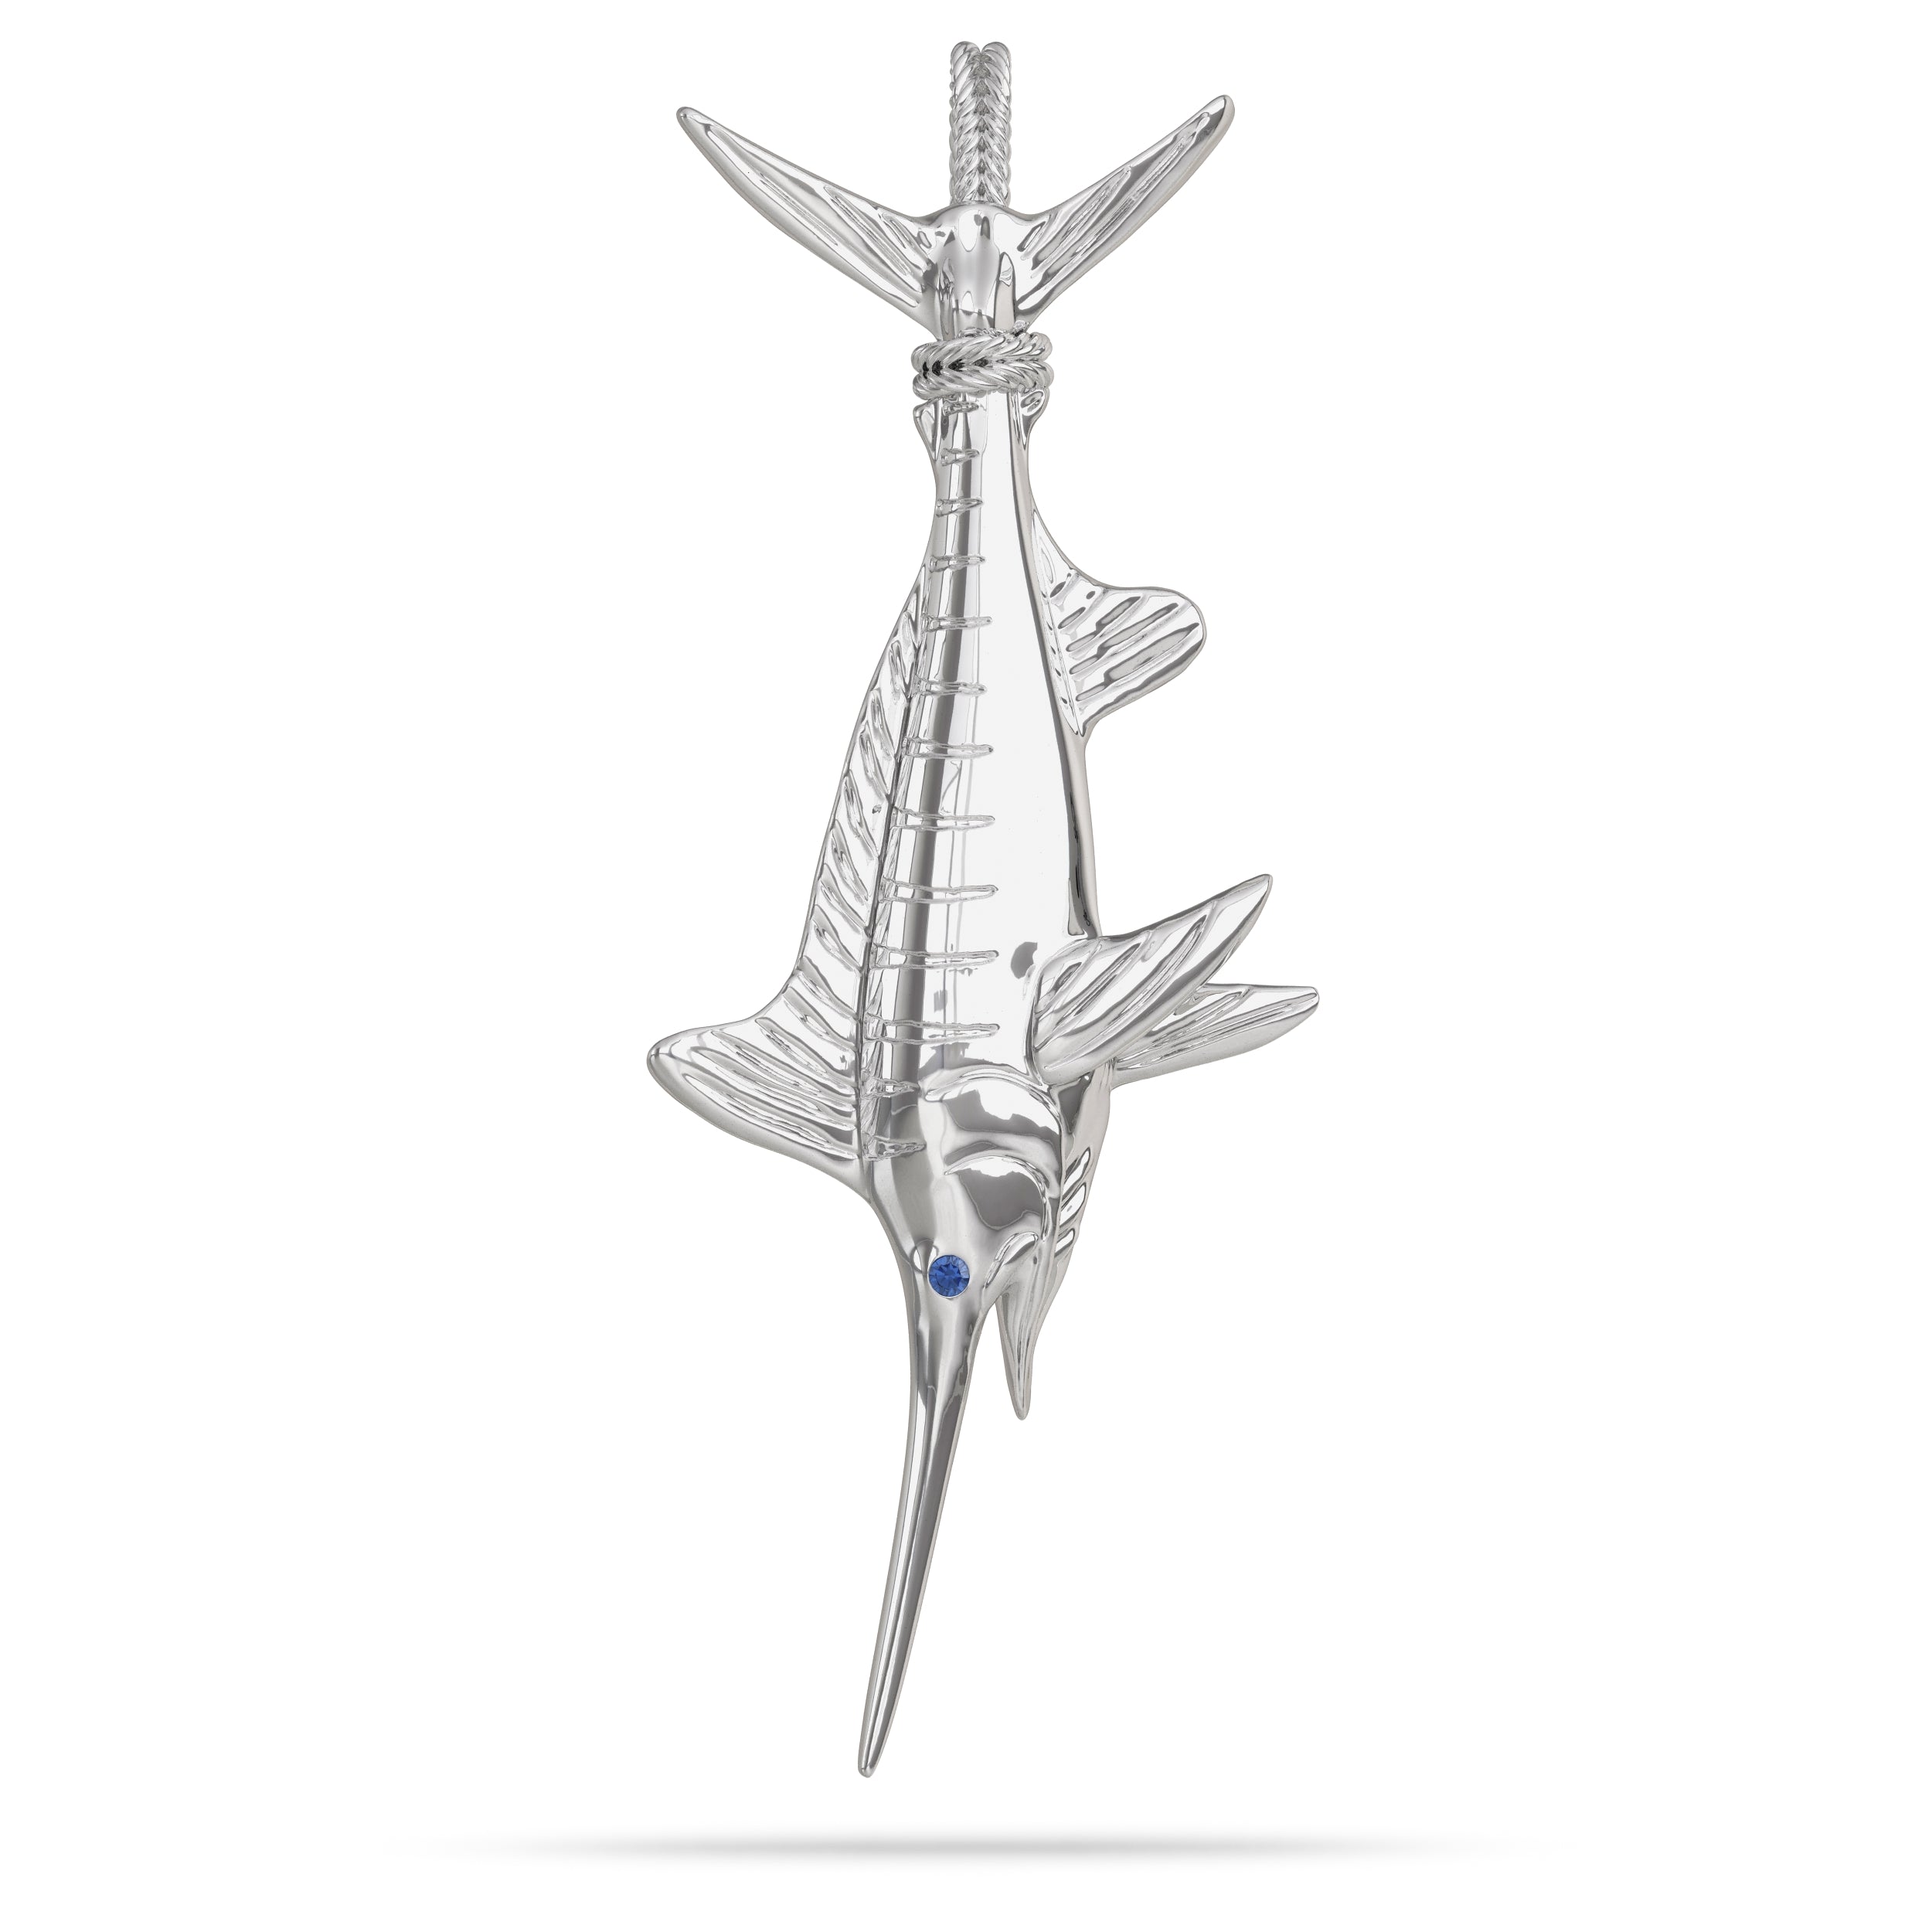 Sterling Silver White Marlin Pendant High Polished Mirror Finish With Blue Sapphire Eye with A Mariner Shackle Bail Custom Designed By Nautical Treasure Jewelry In The Florida Keys Open